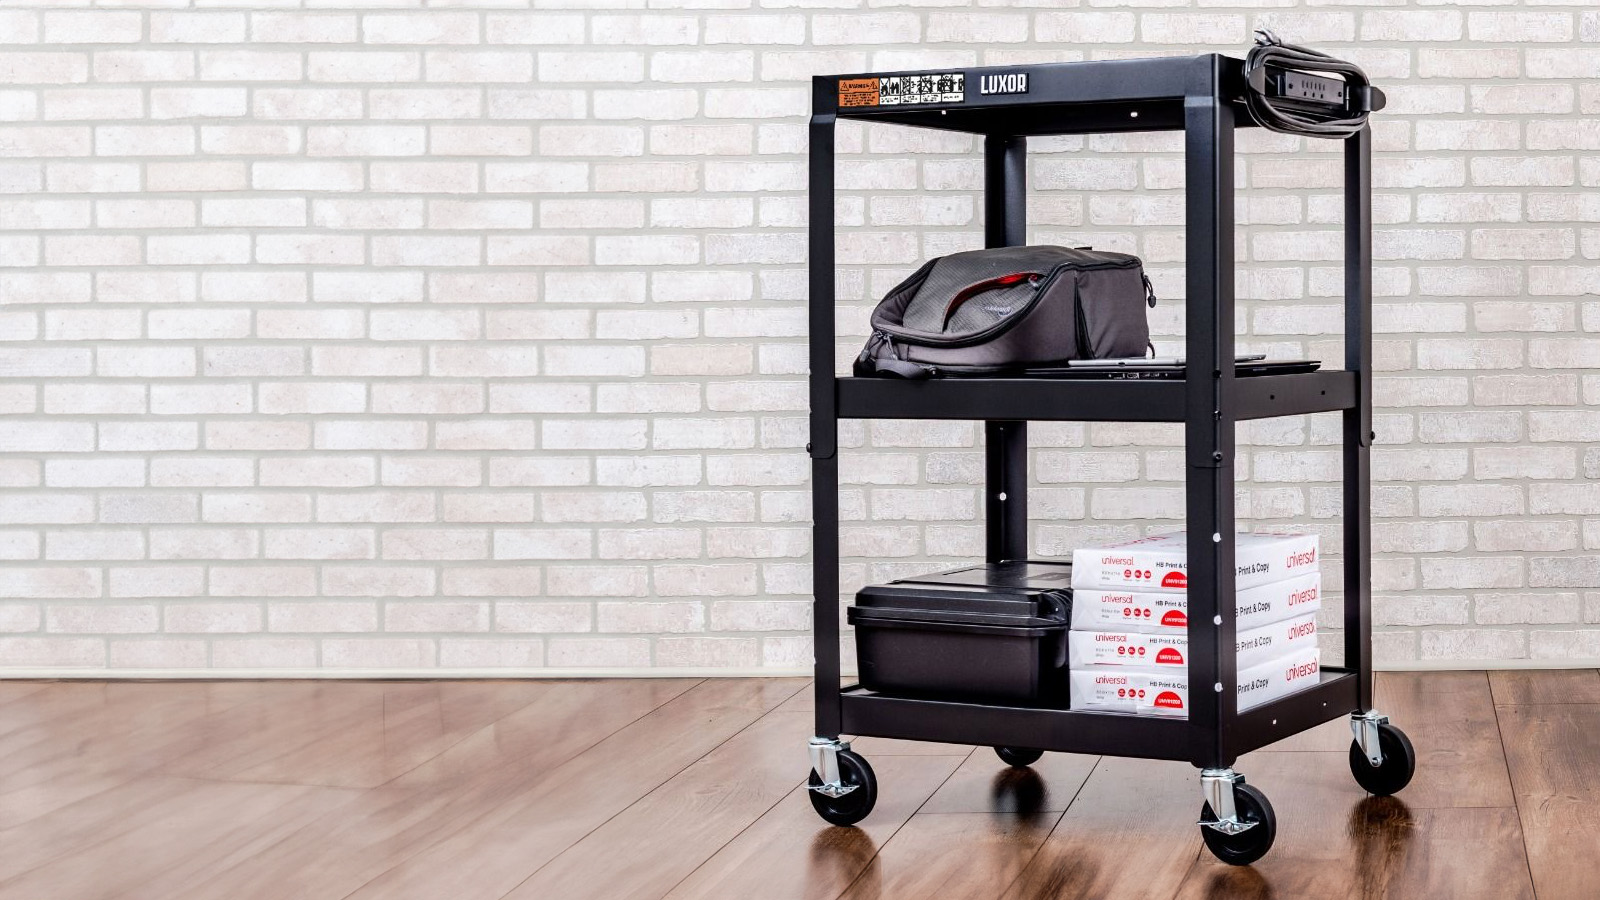 Luxor black metal multipurpose utility cart with wheels, featuring a power strip on top shelf, alongside office supplies and Universal print copy boxes on lower shelves, against a white brick wall.